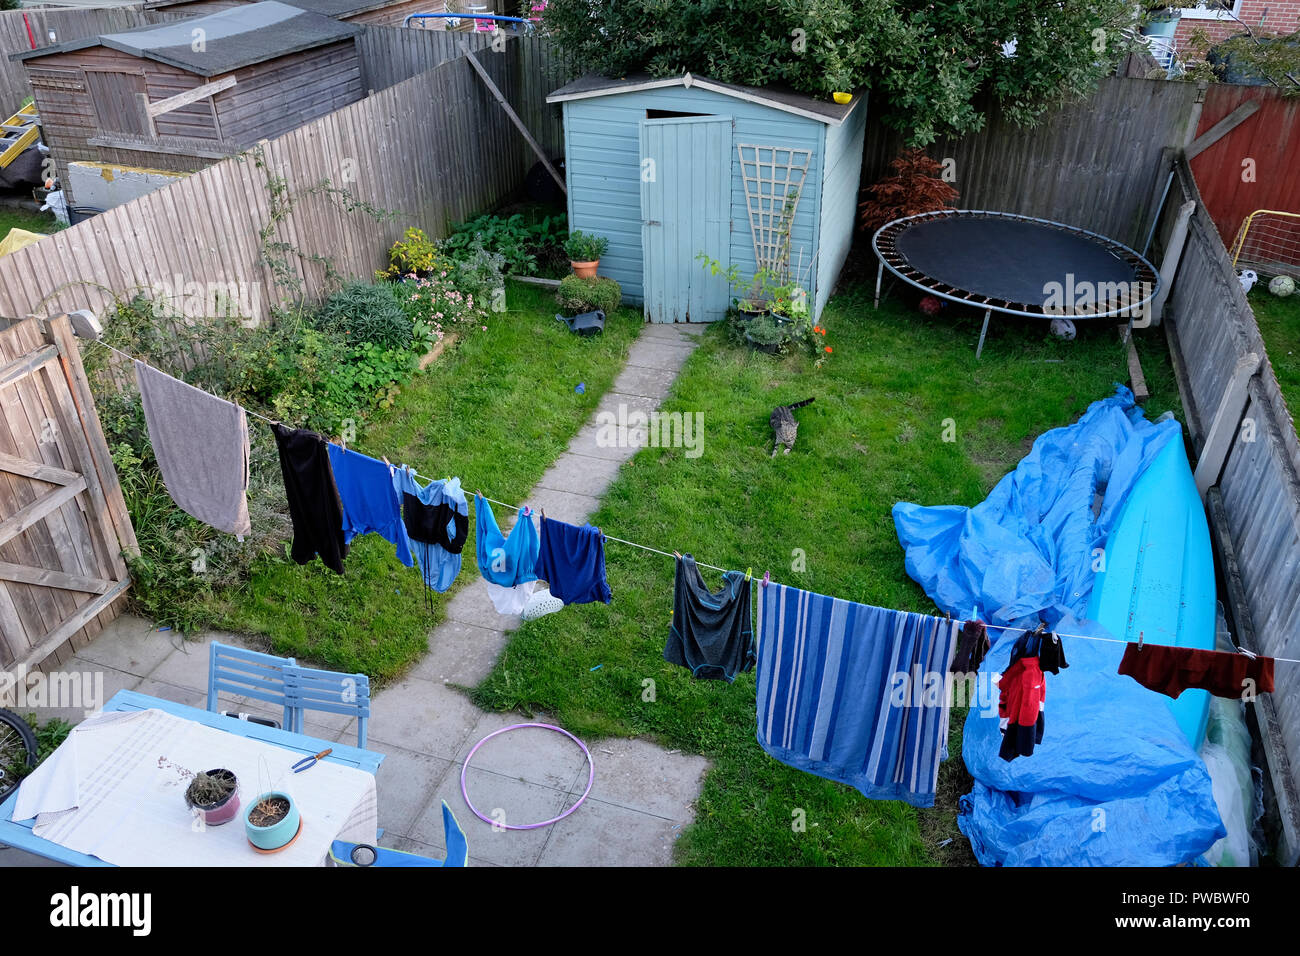 Back garden of a new build house with clothes hanging on washing line, shed, kids trampoline, kayak & plants growing in Cardiff, Wales UK KATHY DEWITT Stock Photo